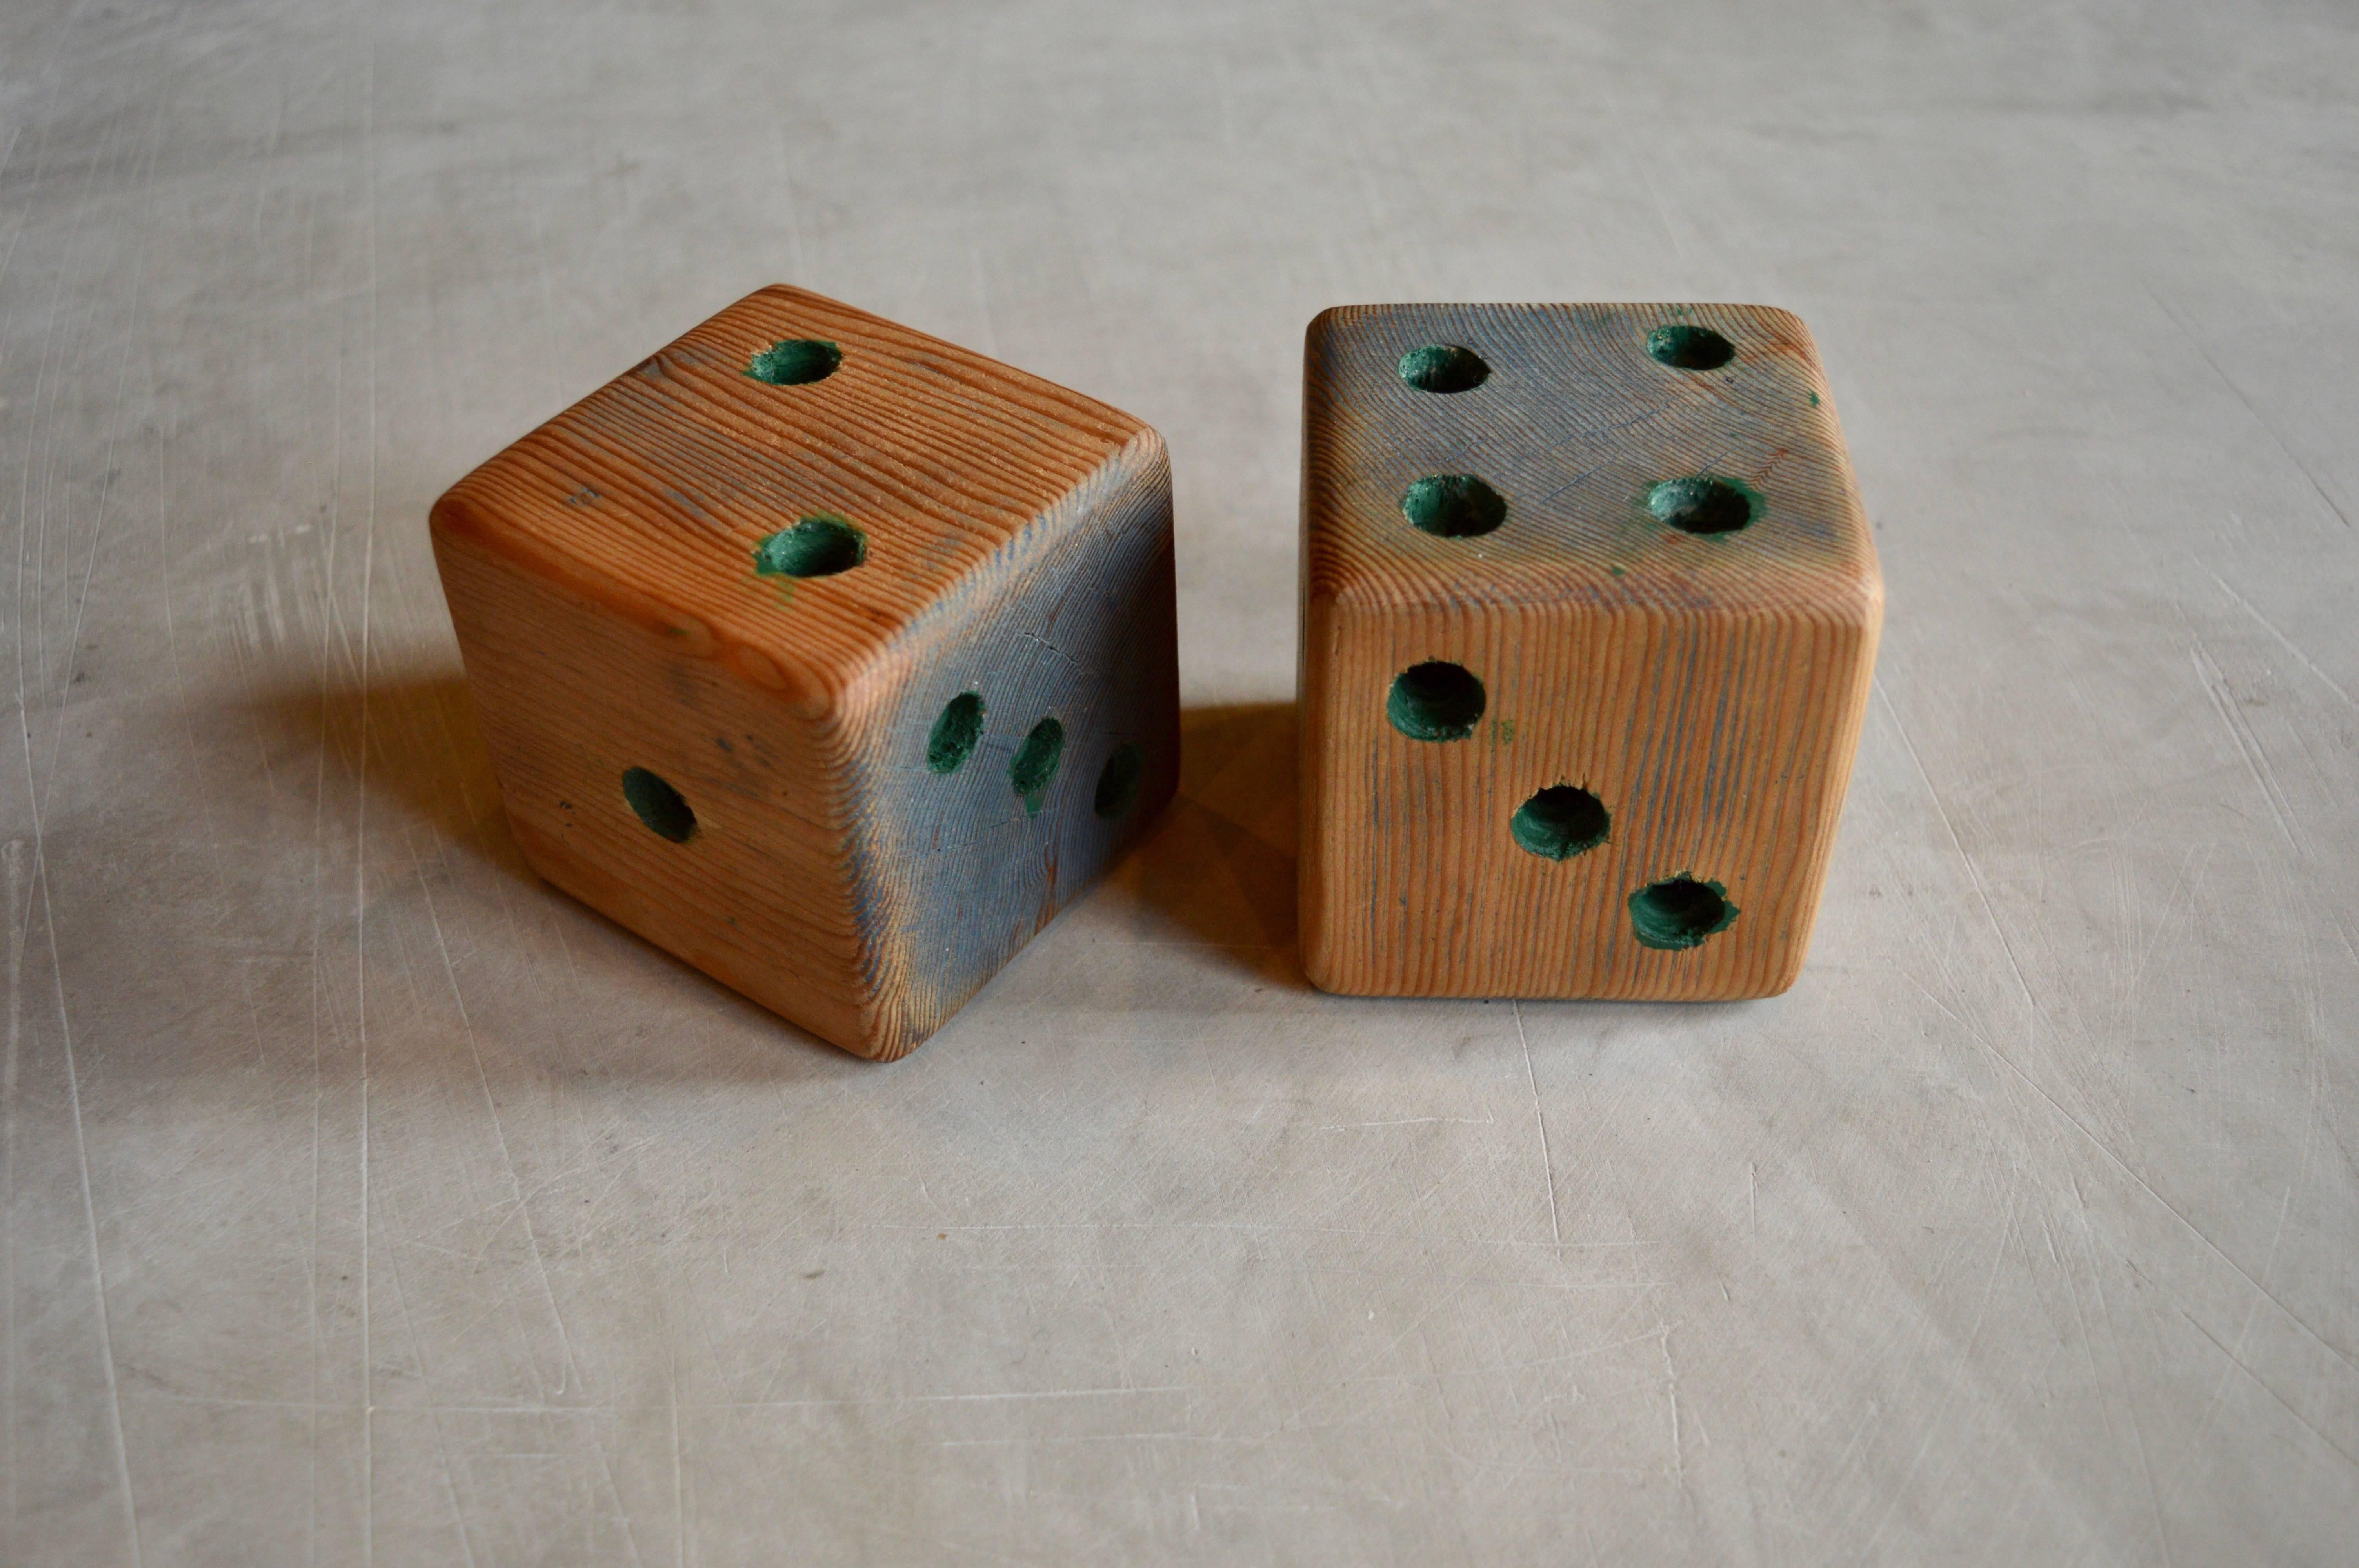 Great pair of handmade Folk Art wood dice. Green coloring inside the holes and on a few random sides. Interesting tabletop sculpture.